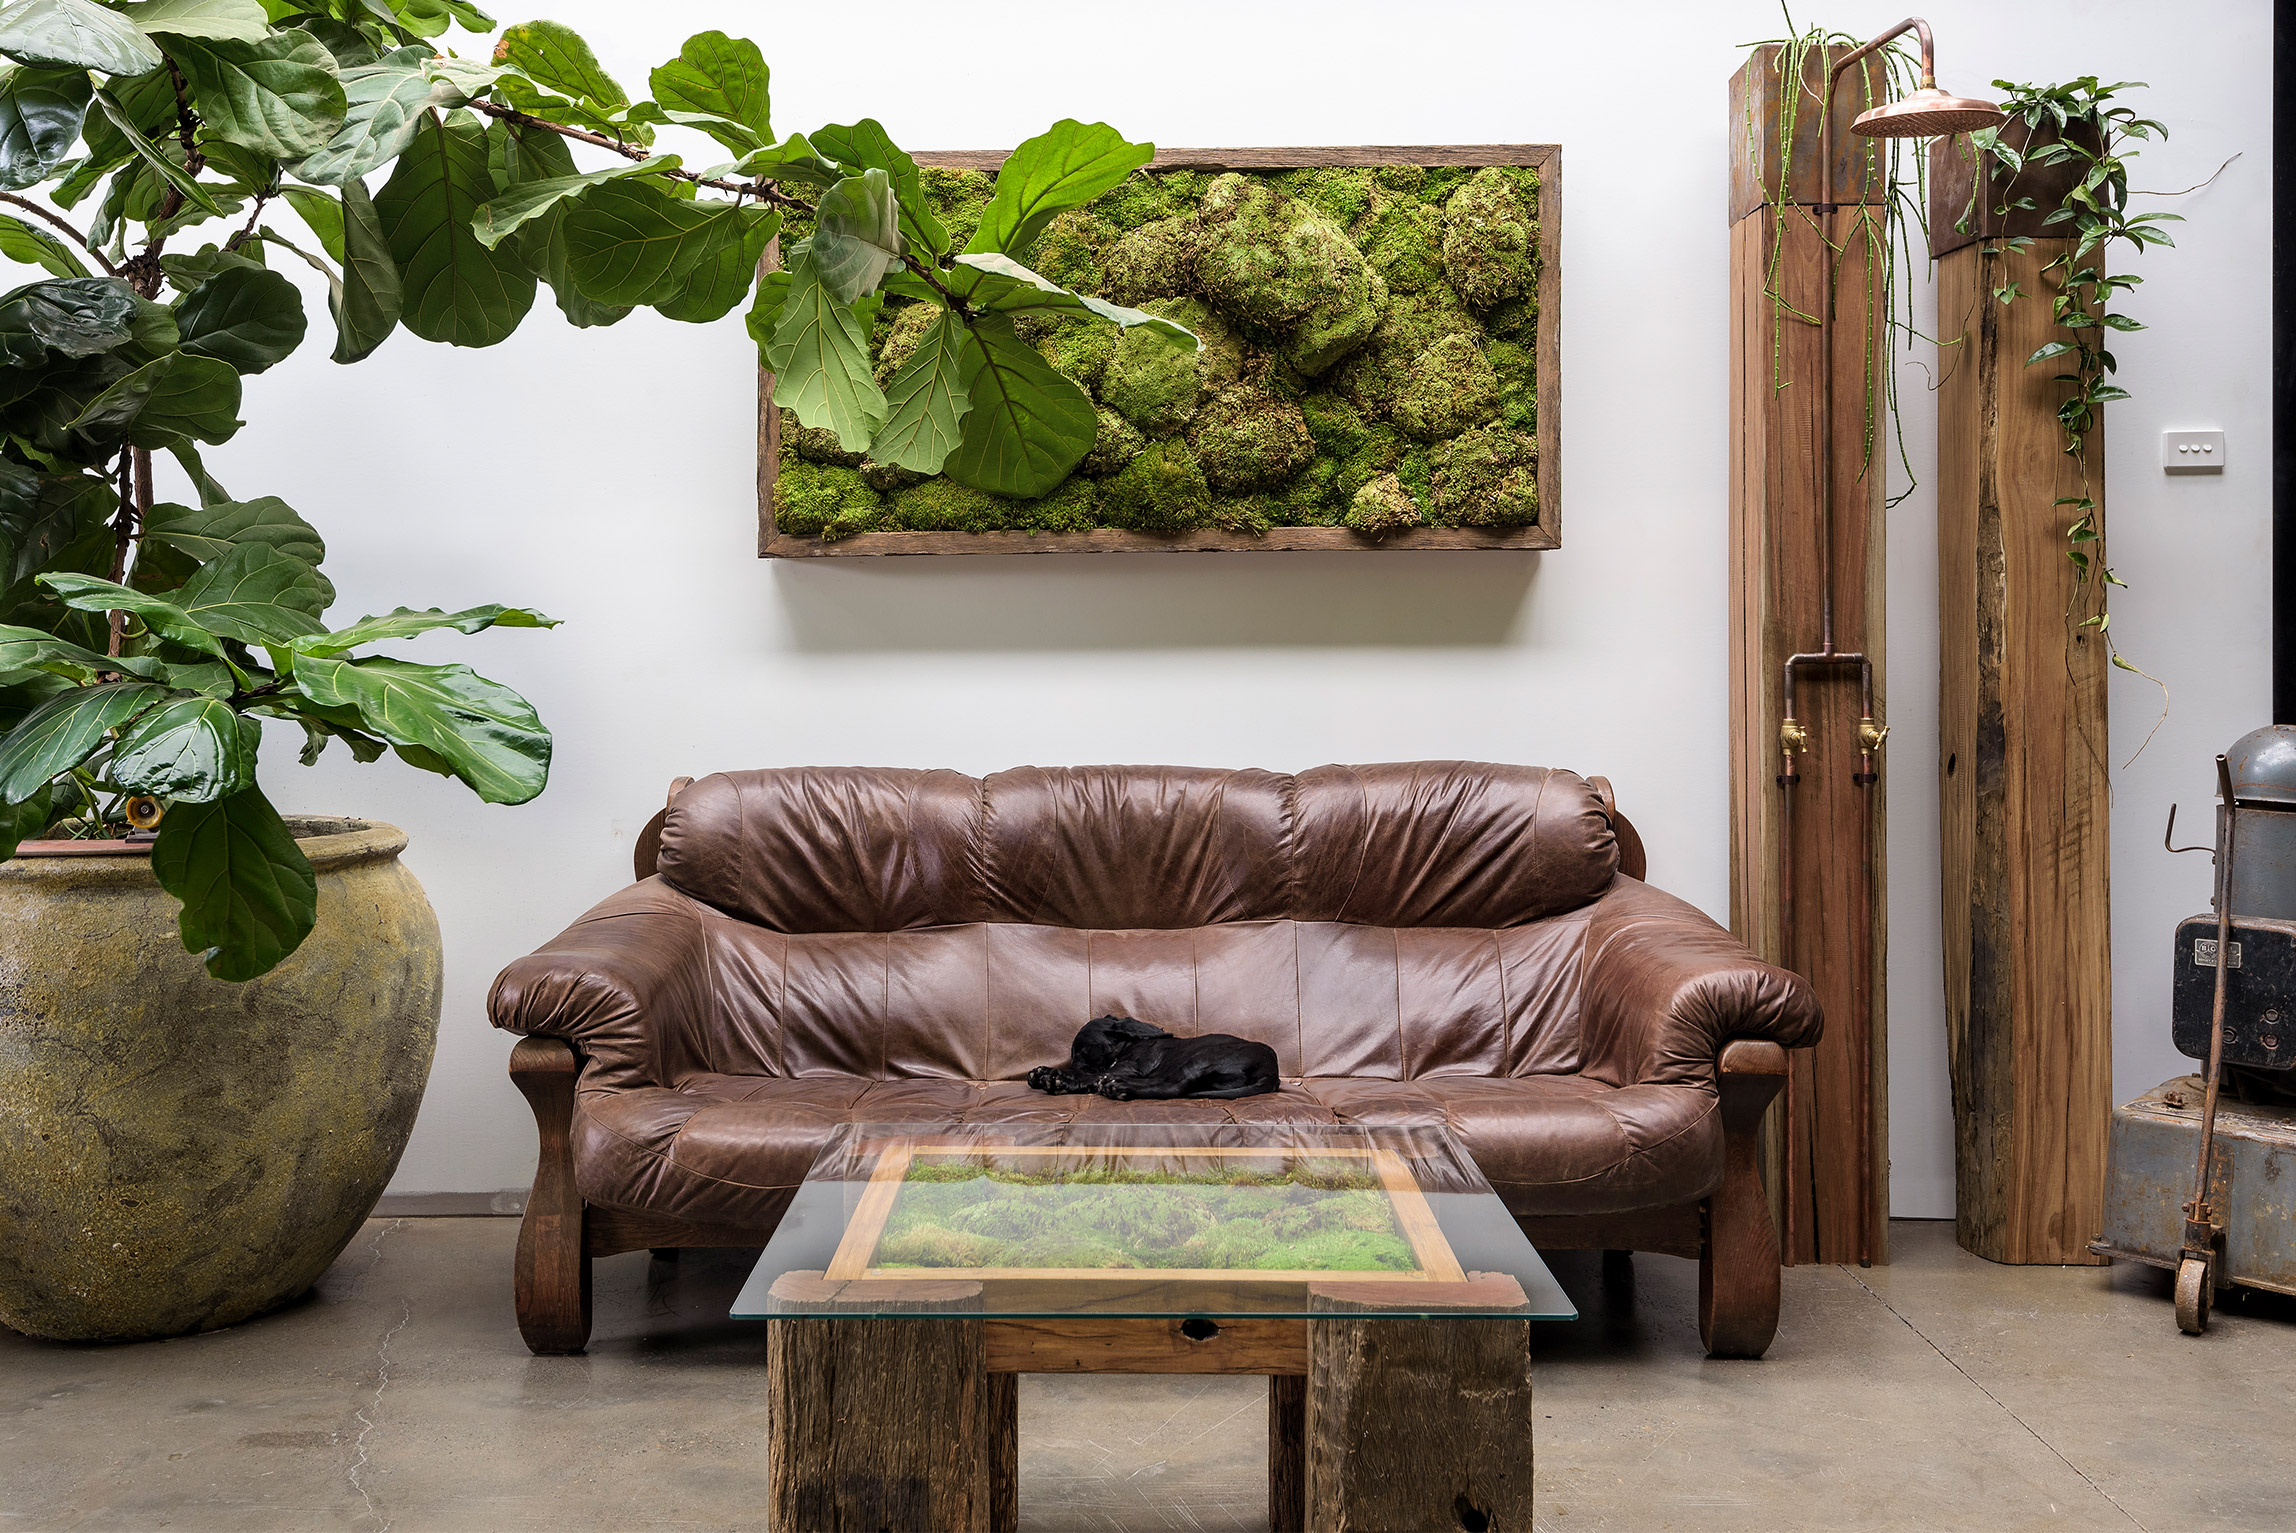 Preserved moss wall art in frame and moss coffee table in lounge setting